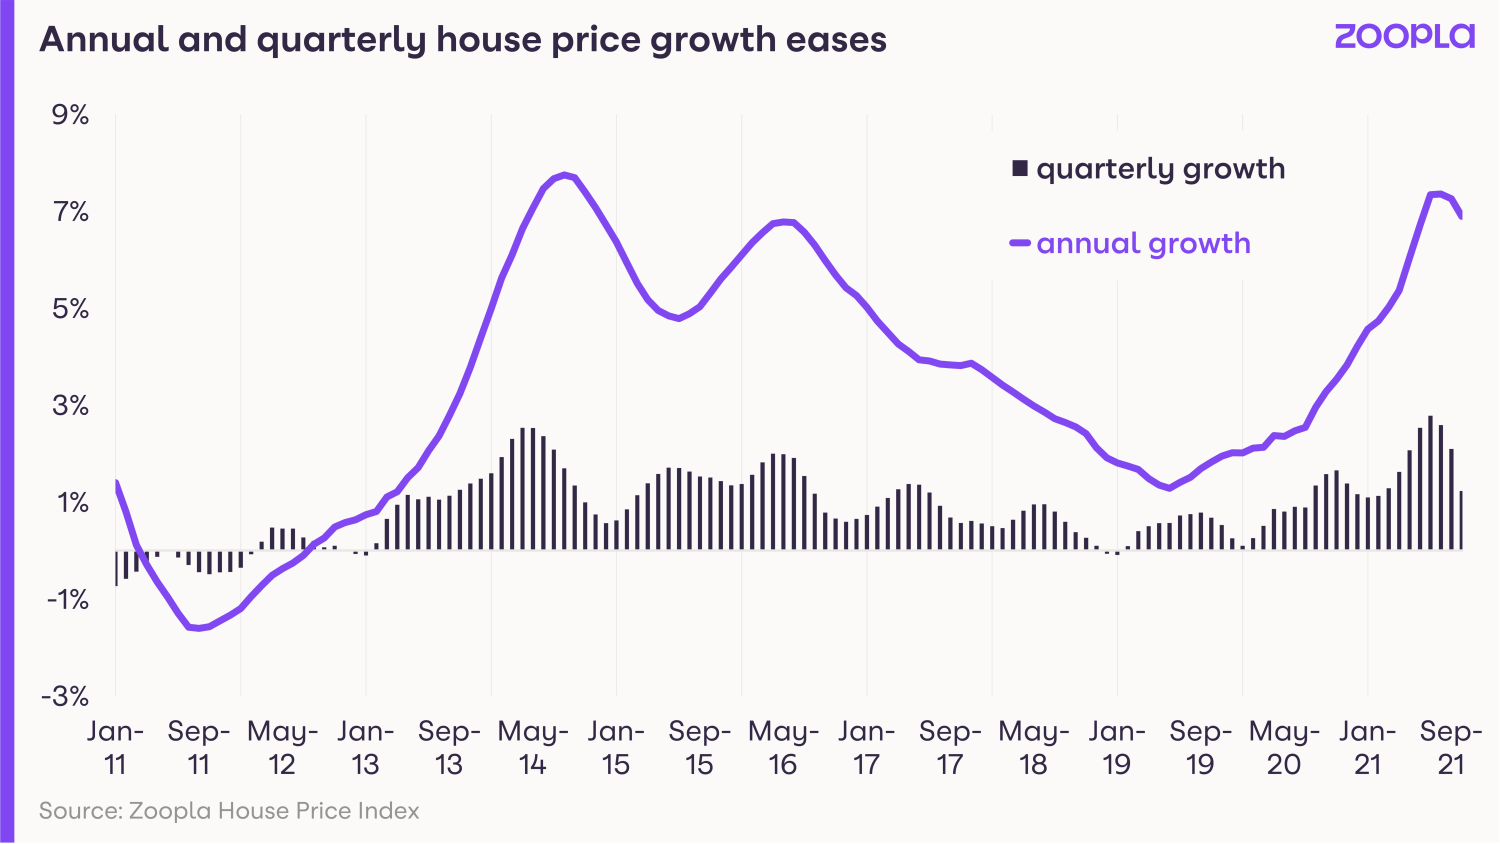 HPI November 2021: Annual and quarterly house price growth eases